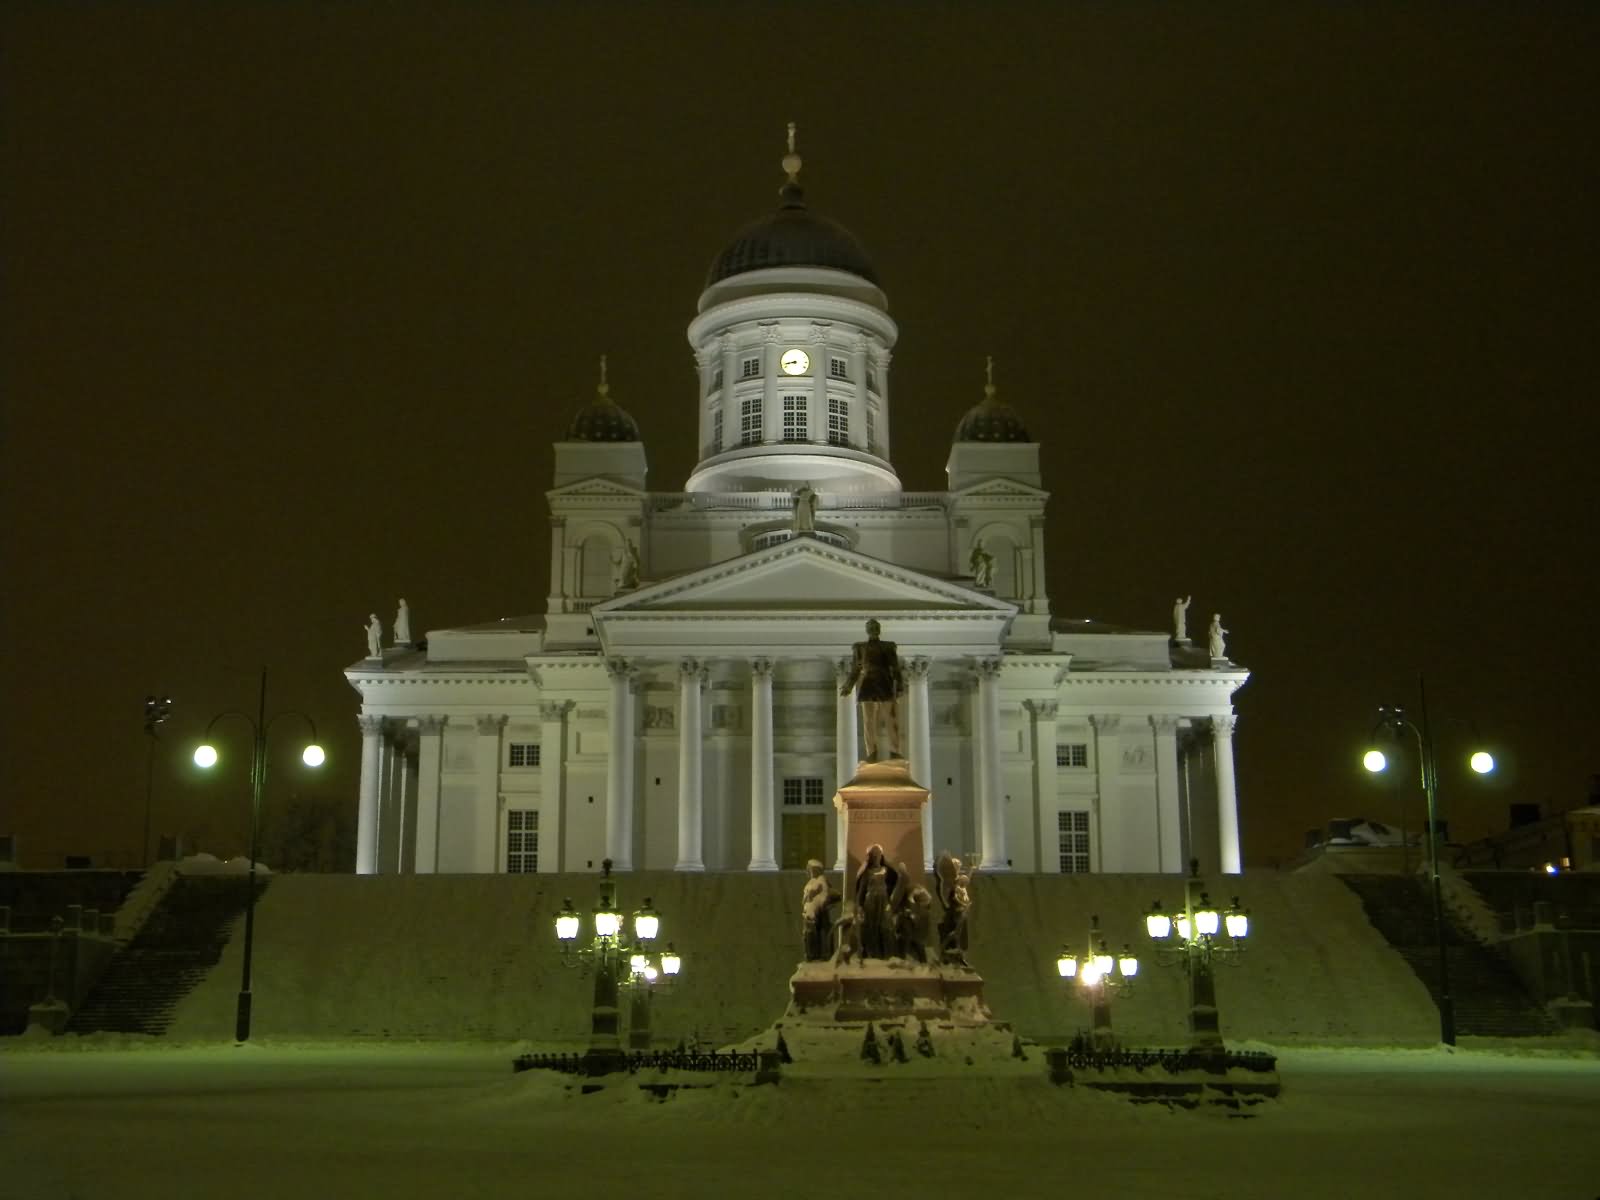 15 Adorable Night View Images Of The Helsinki Cathedral In Finland